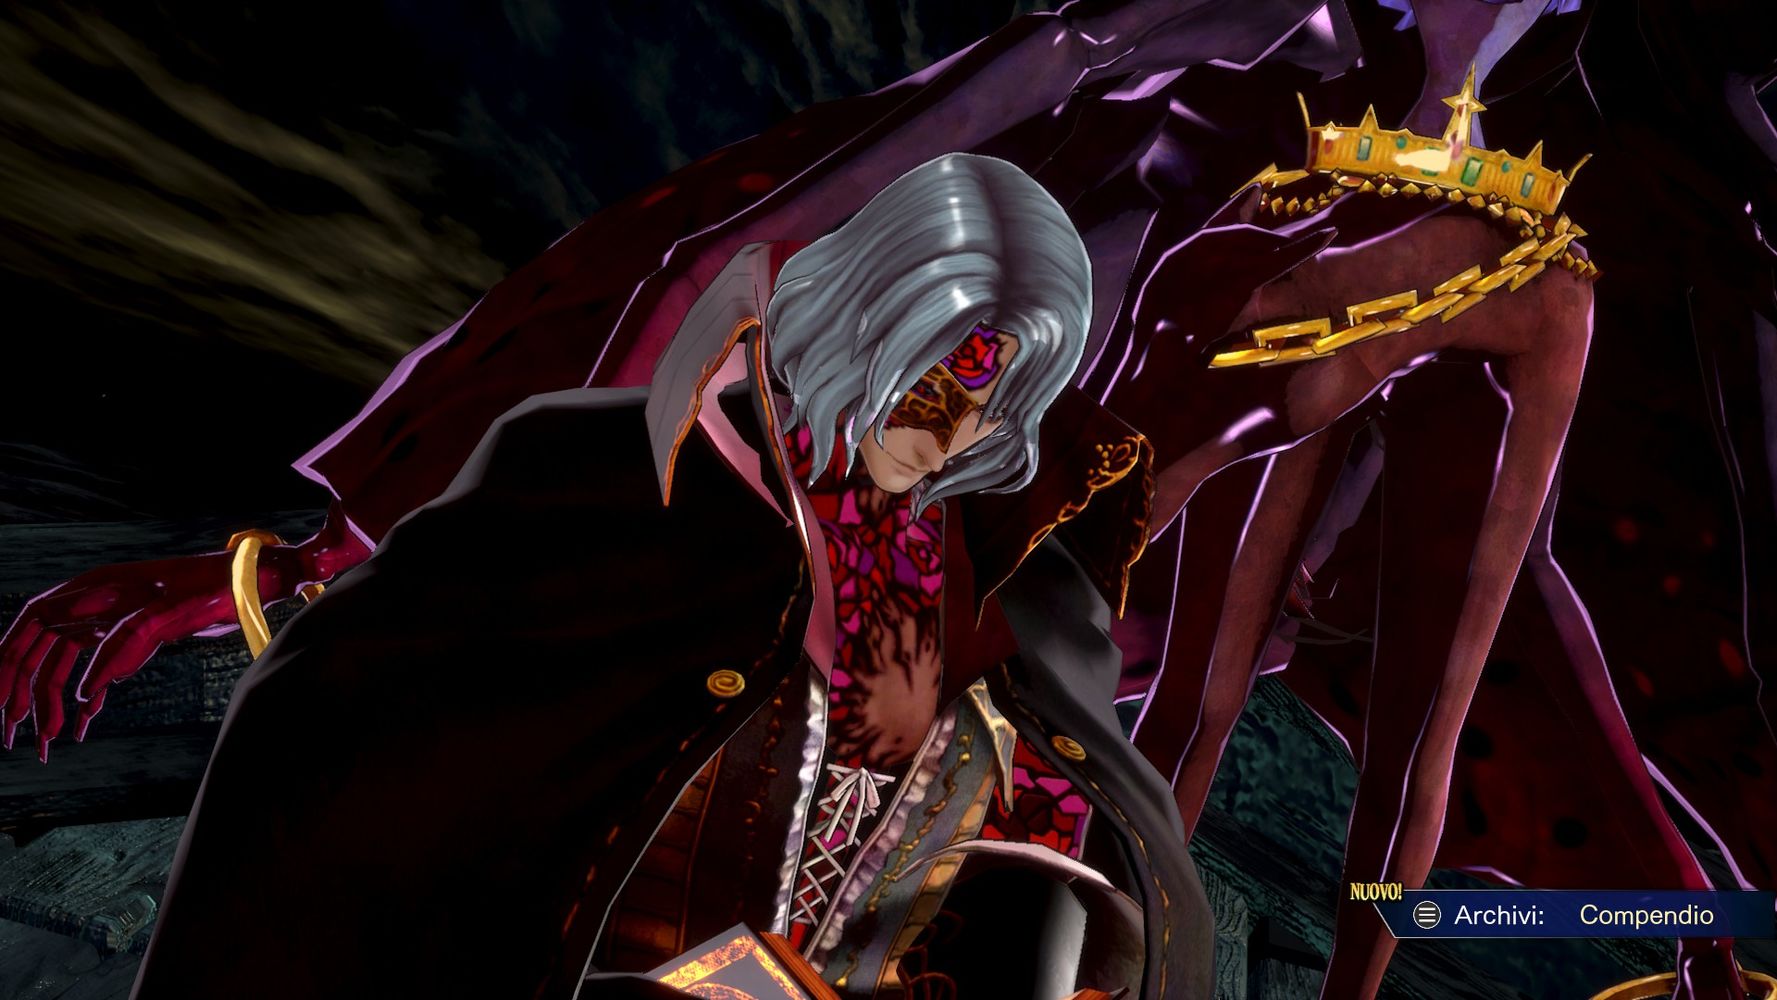 Bloodstained: Ritual of The Night